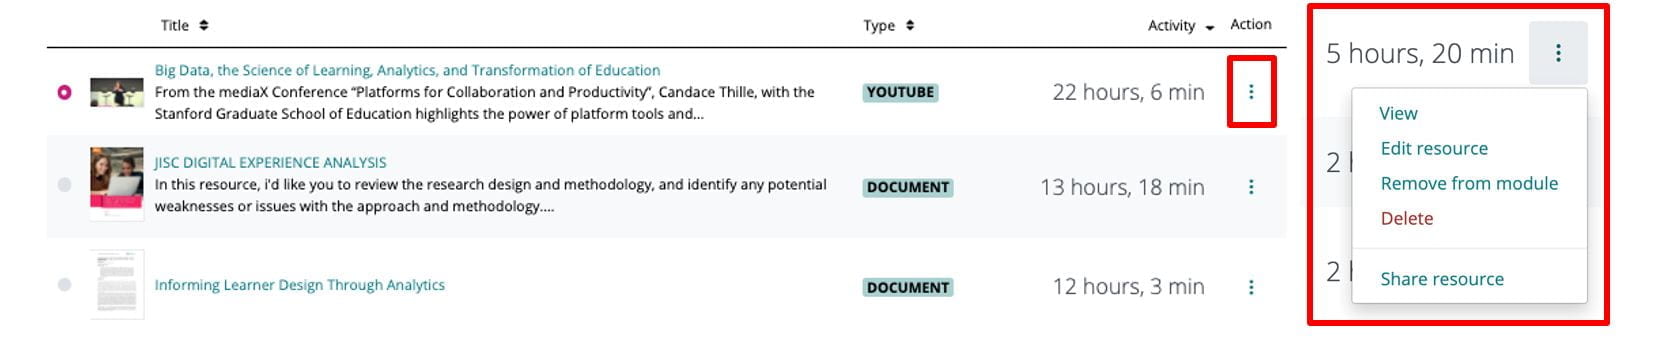 A list of resources for the module is displayed. It shows the title, a thumbnail, type of document, and the total time spent by students engaging with it. A red box shows the ellipsis menu on each item.